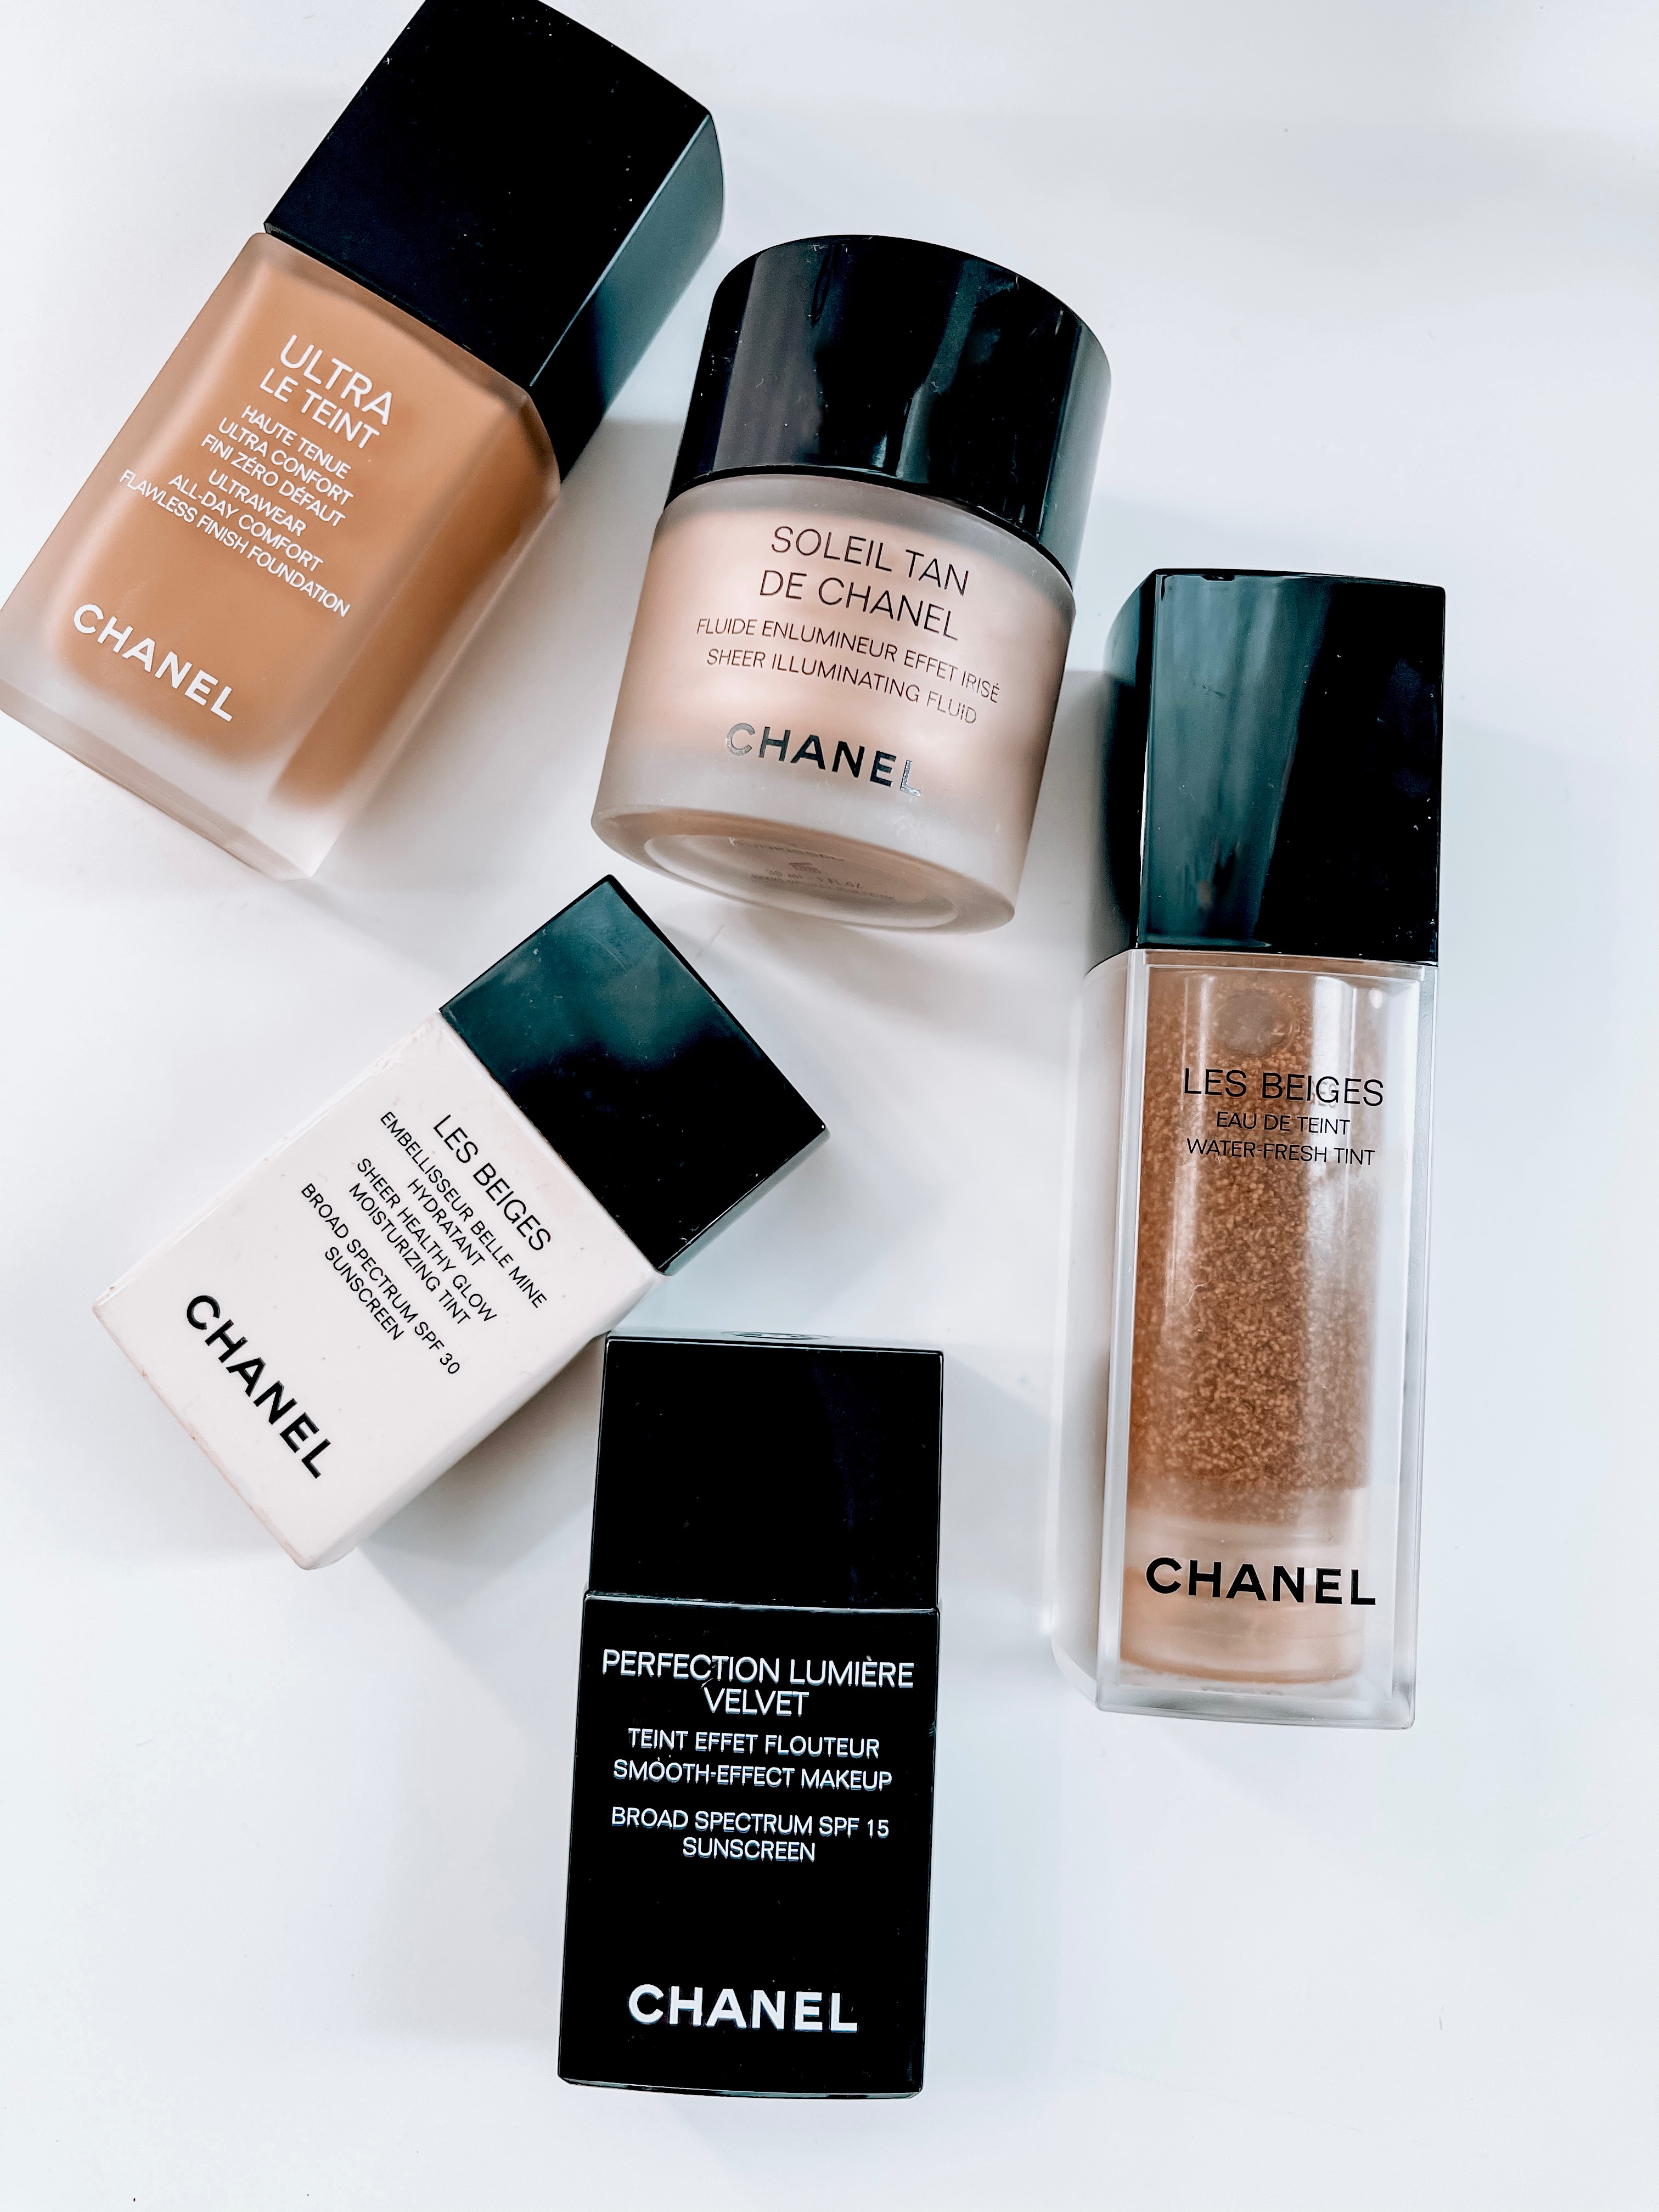 CHANEL spring beauty essentials lizostyle by Rose Ferreira